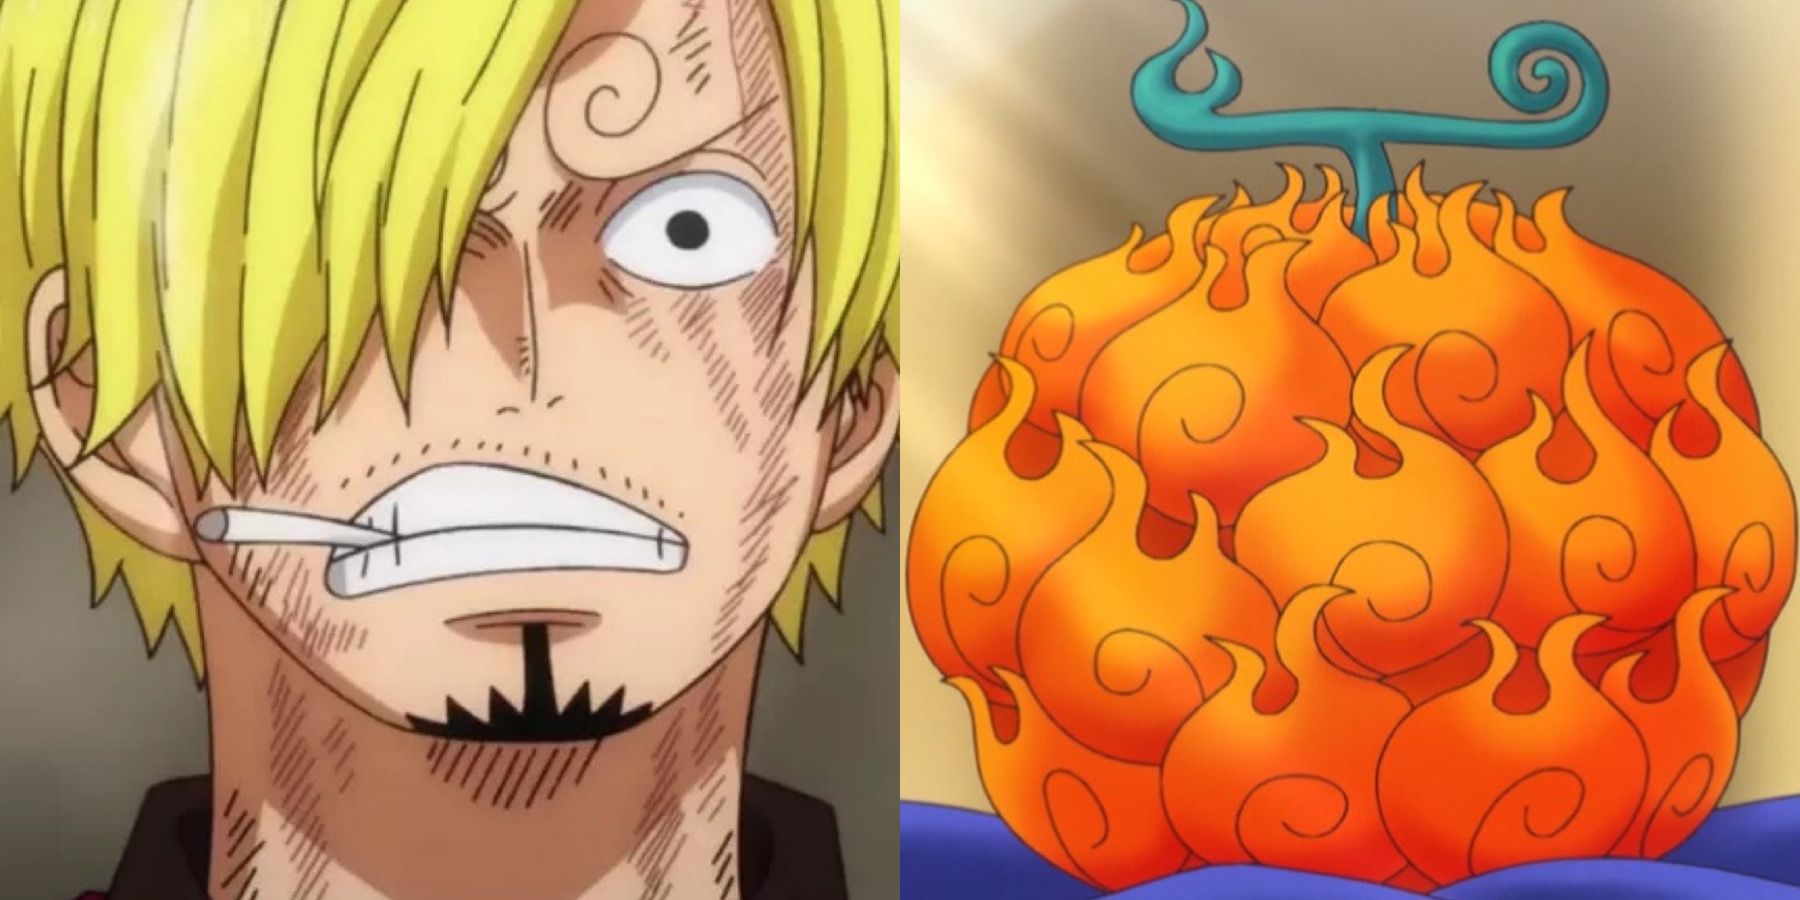 Powers & Abilities - Give each strawhat 3 devil fruit